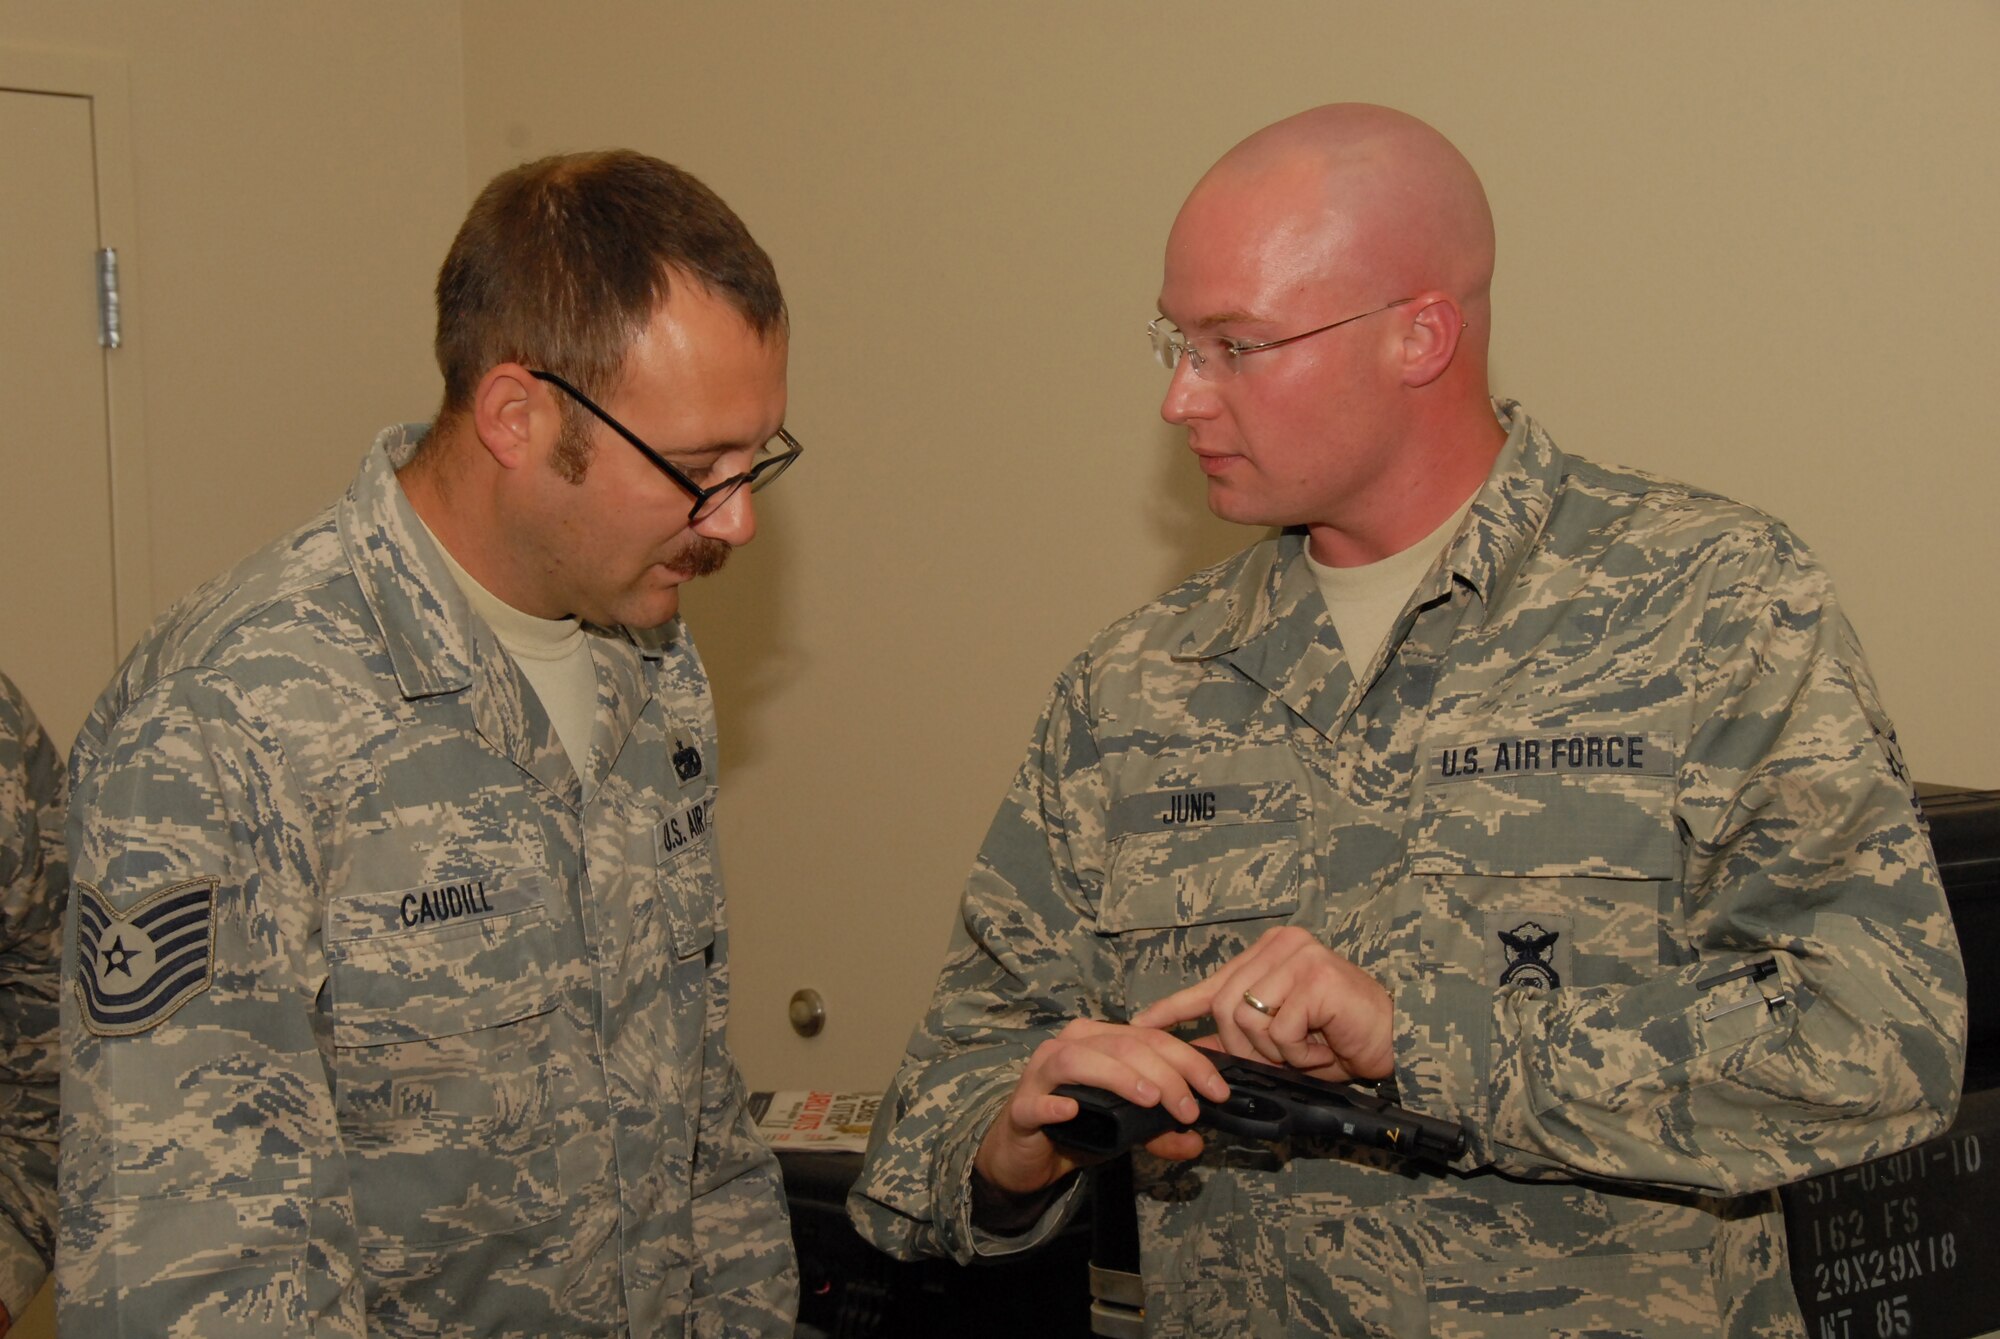 Tech. Sgt. Daniel Jung, 178th Security Forces, Ohio Air National Guard explains the concept of safe and clear to Tech. Sgt. Jonathon Caudill, 178th Logistics Readiness Squadron, Ohio Air National Guard during weapons training July 30, 2013 at Combat Readiness Training Center Alpena, Mich.  Jung and Caudill participated in the weapons training during the annual Alpena Michigan training exercise. (U.S. Air National Guard photo by Master Sergeant Seth Skidmore/Released)